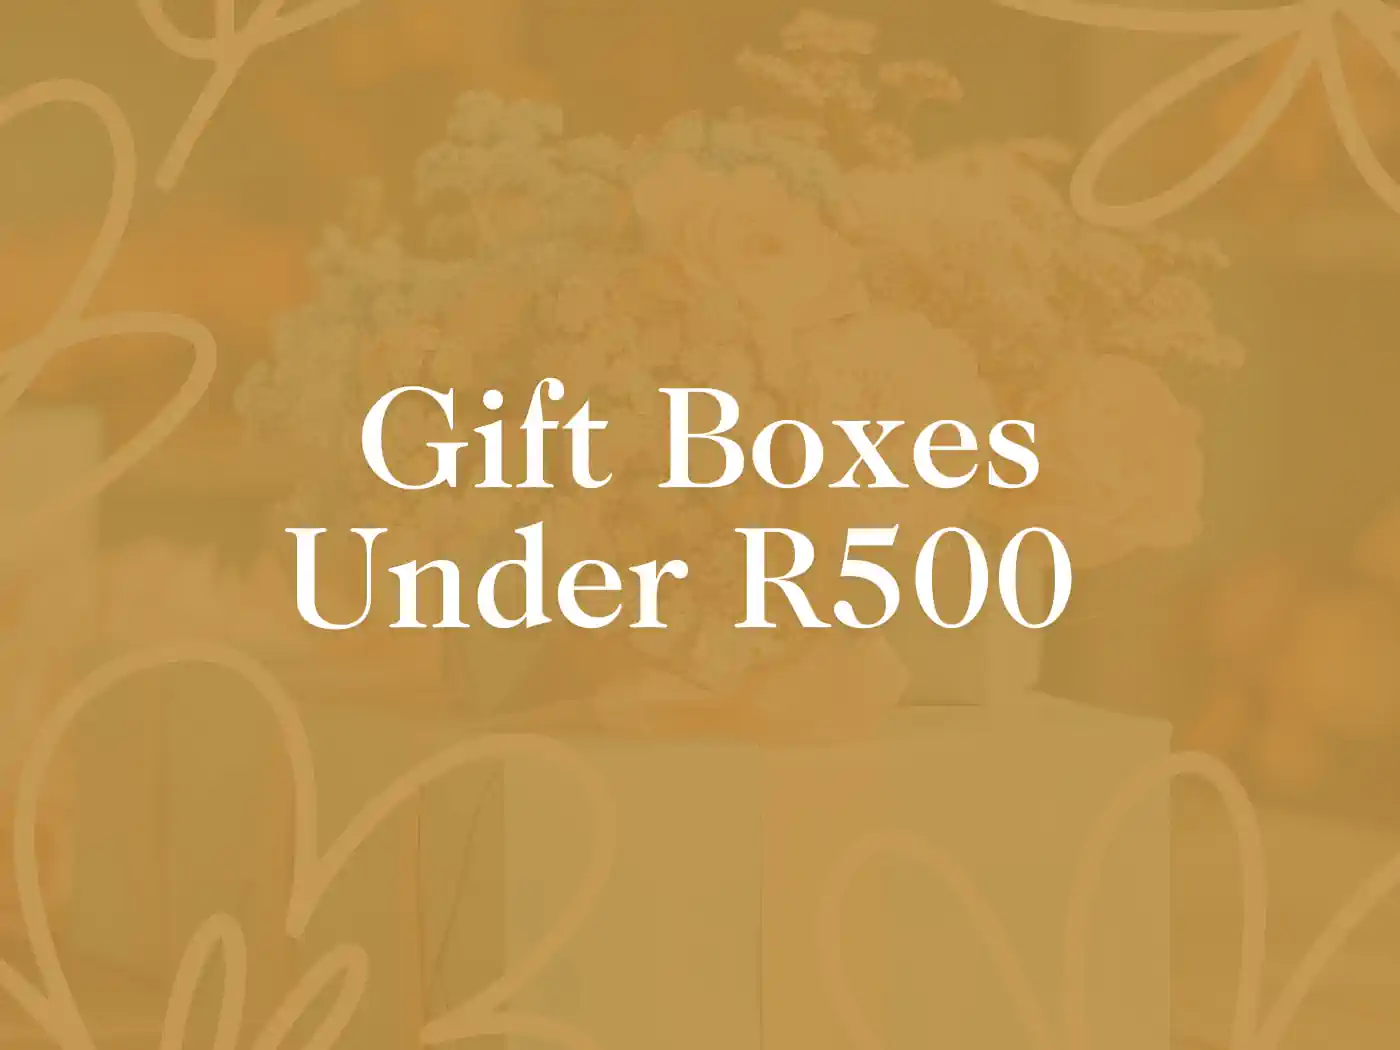 "Elegant promotional banner featuring beautifully arranged flowers and text highlighting affordable gift options. Fabulous Flowers and Gifts. Gift Boxes Under R500. Delivered with Heart.